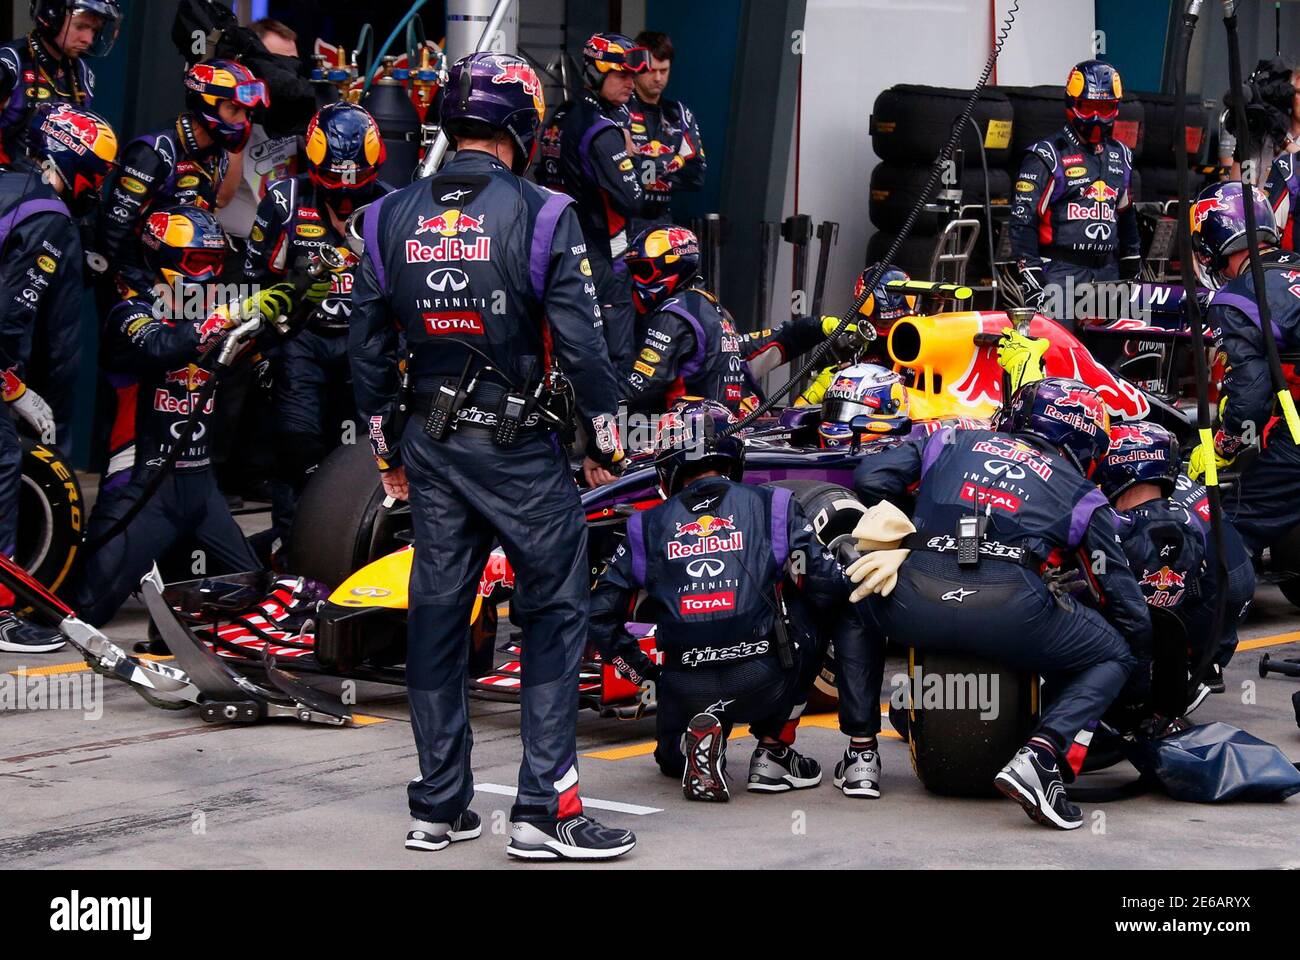 Red Bull Formula One team mechanics perform a pit stop on the car driven by  Daniel Ricciardo of Australia during the Australian F1 Grand Prix at the  Albert Park circuit in Melbourne